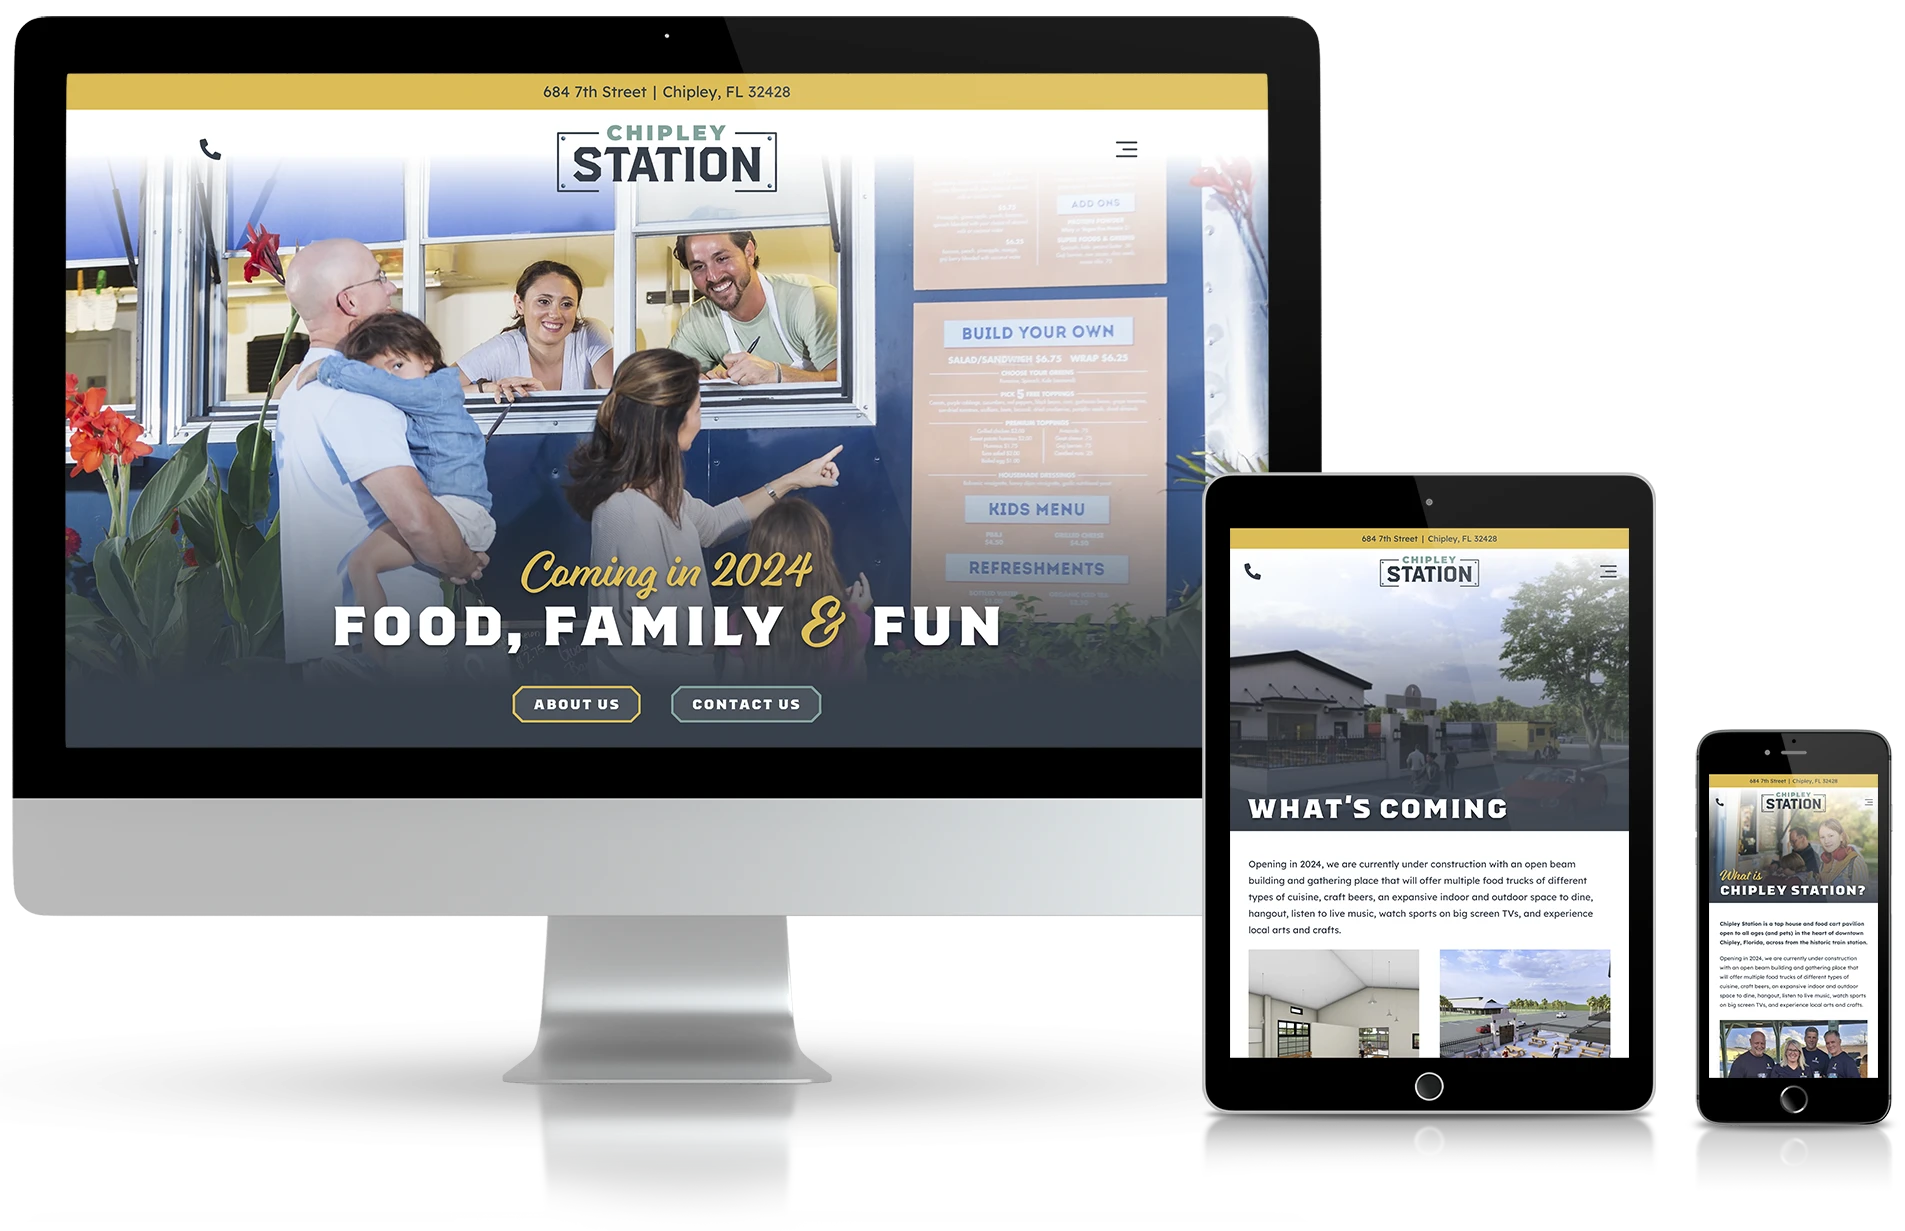 Website design for Chipley Station located in Chipley, Florida.